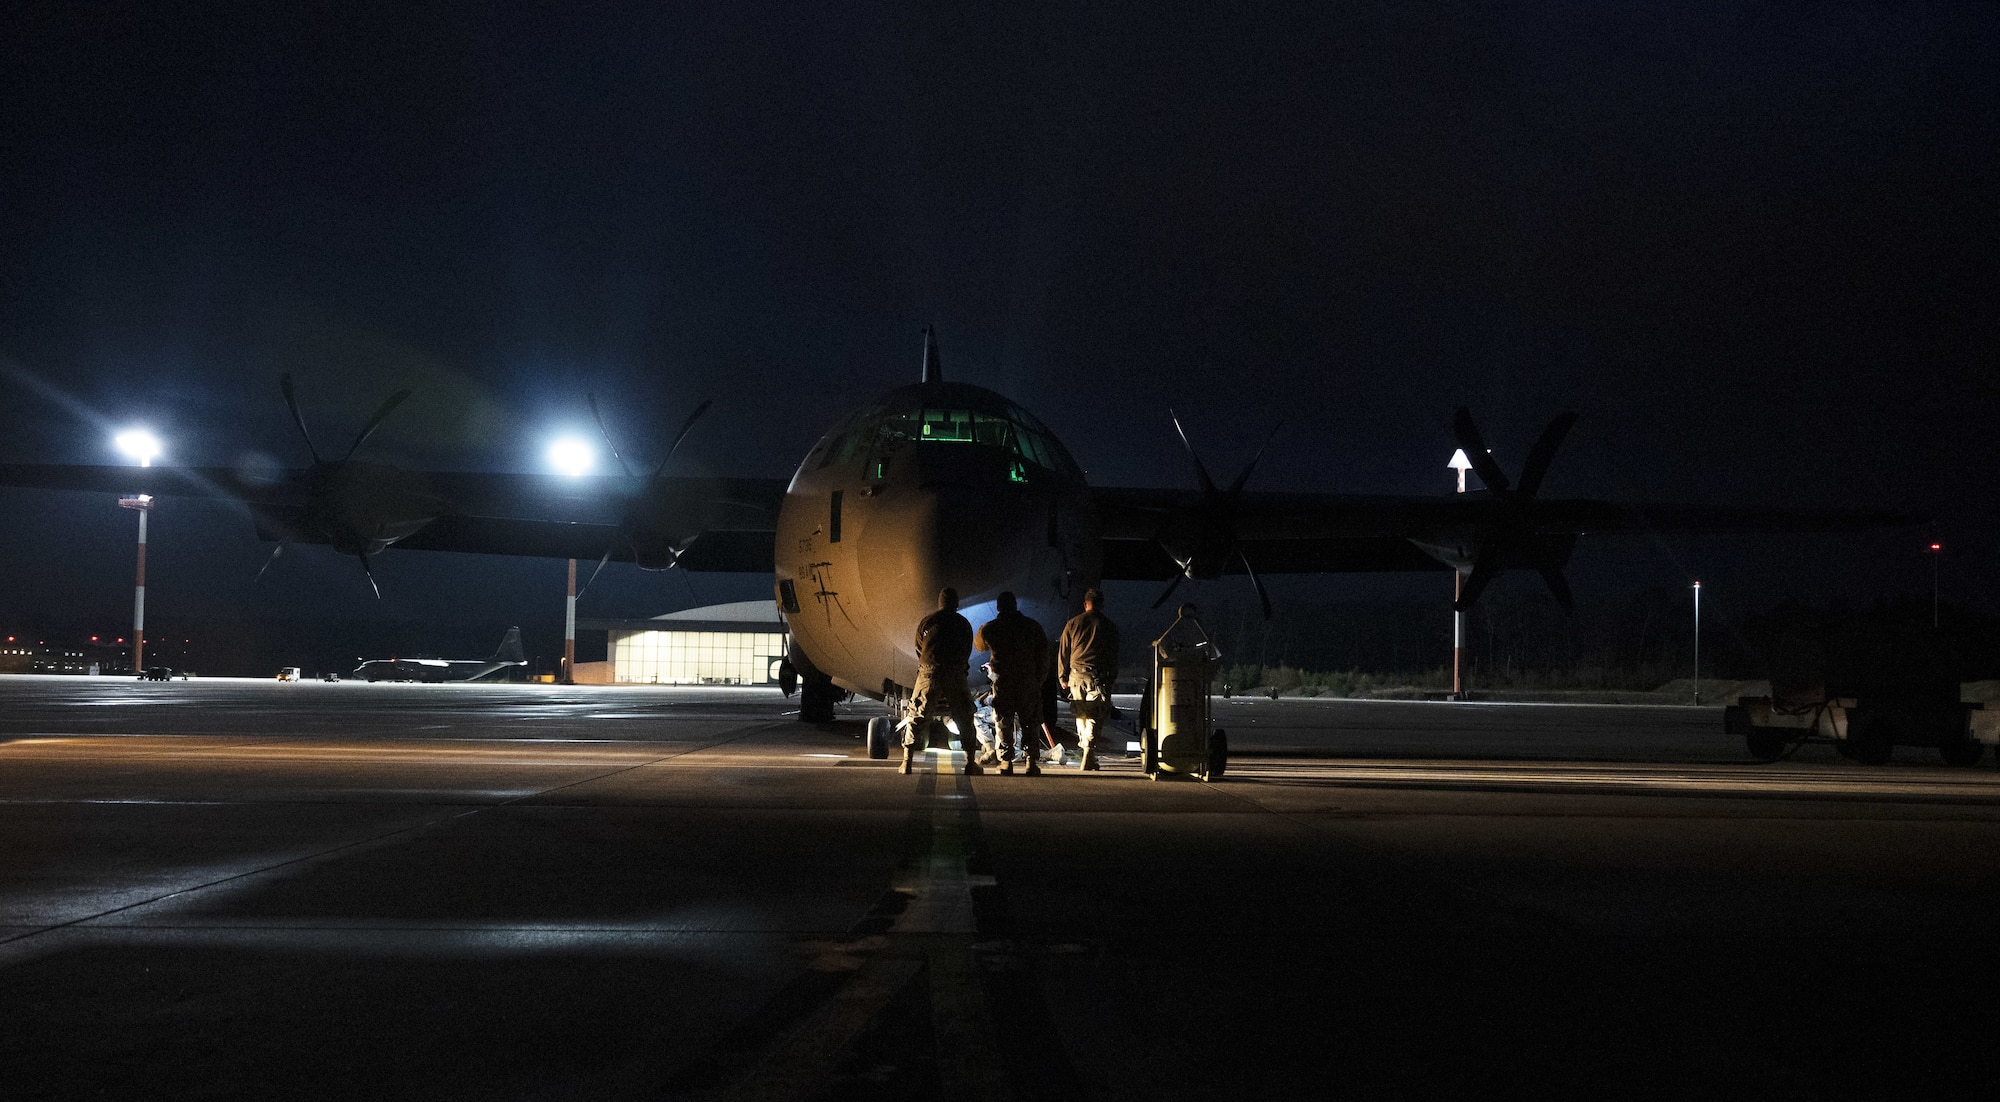 Airmen in front of an aircraft at night.